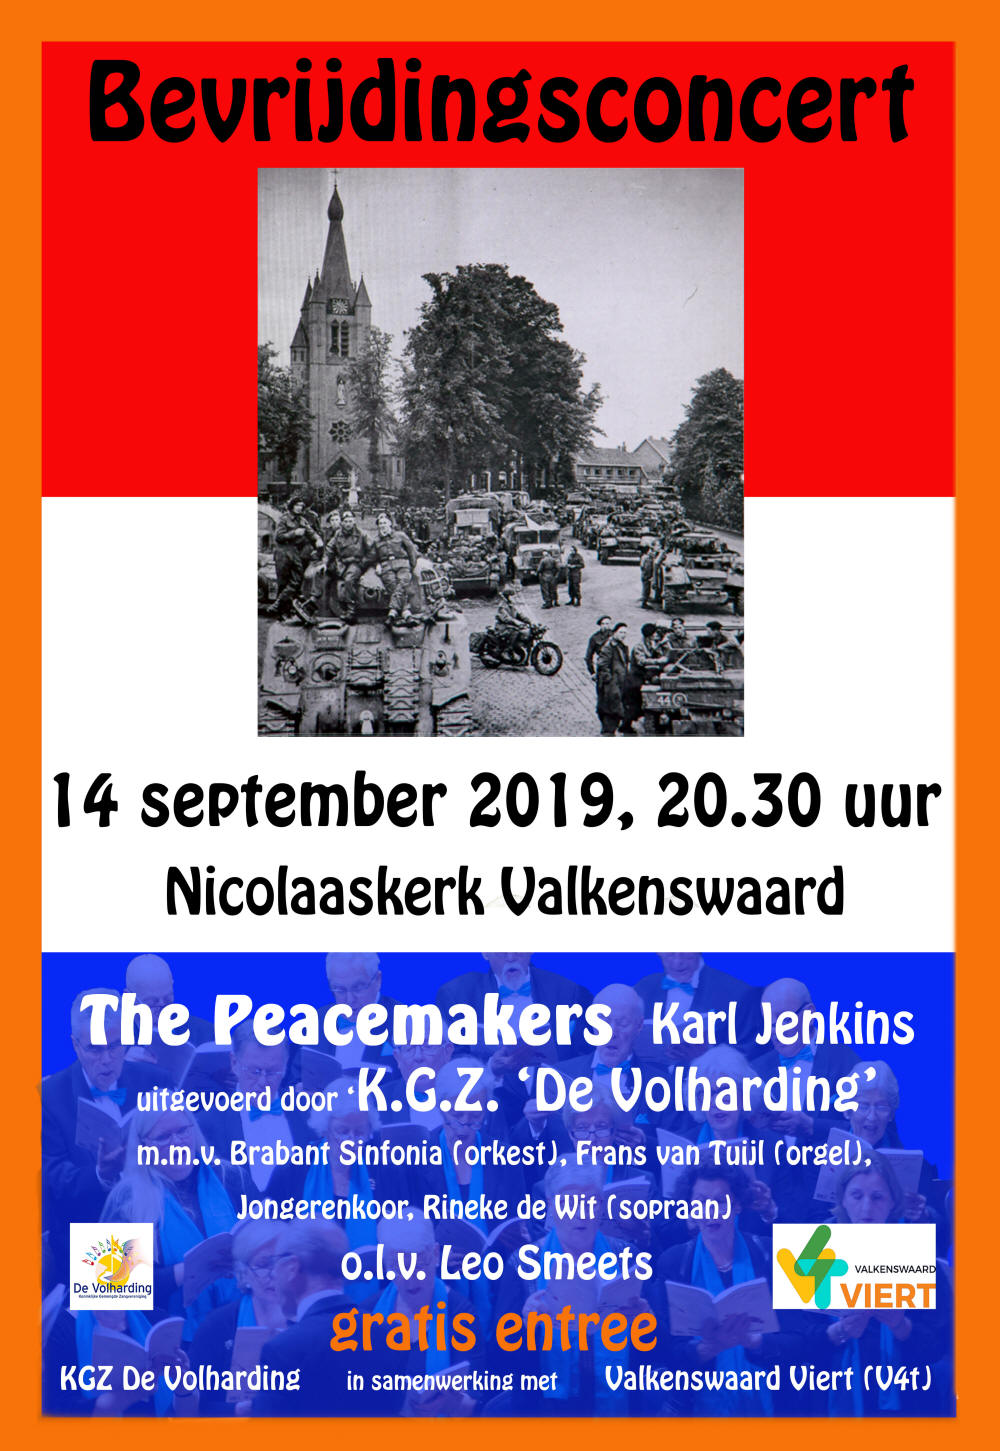 Bevrijdingsconcert 2019 Jenkinds THe Peacemakers